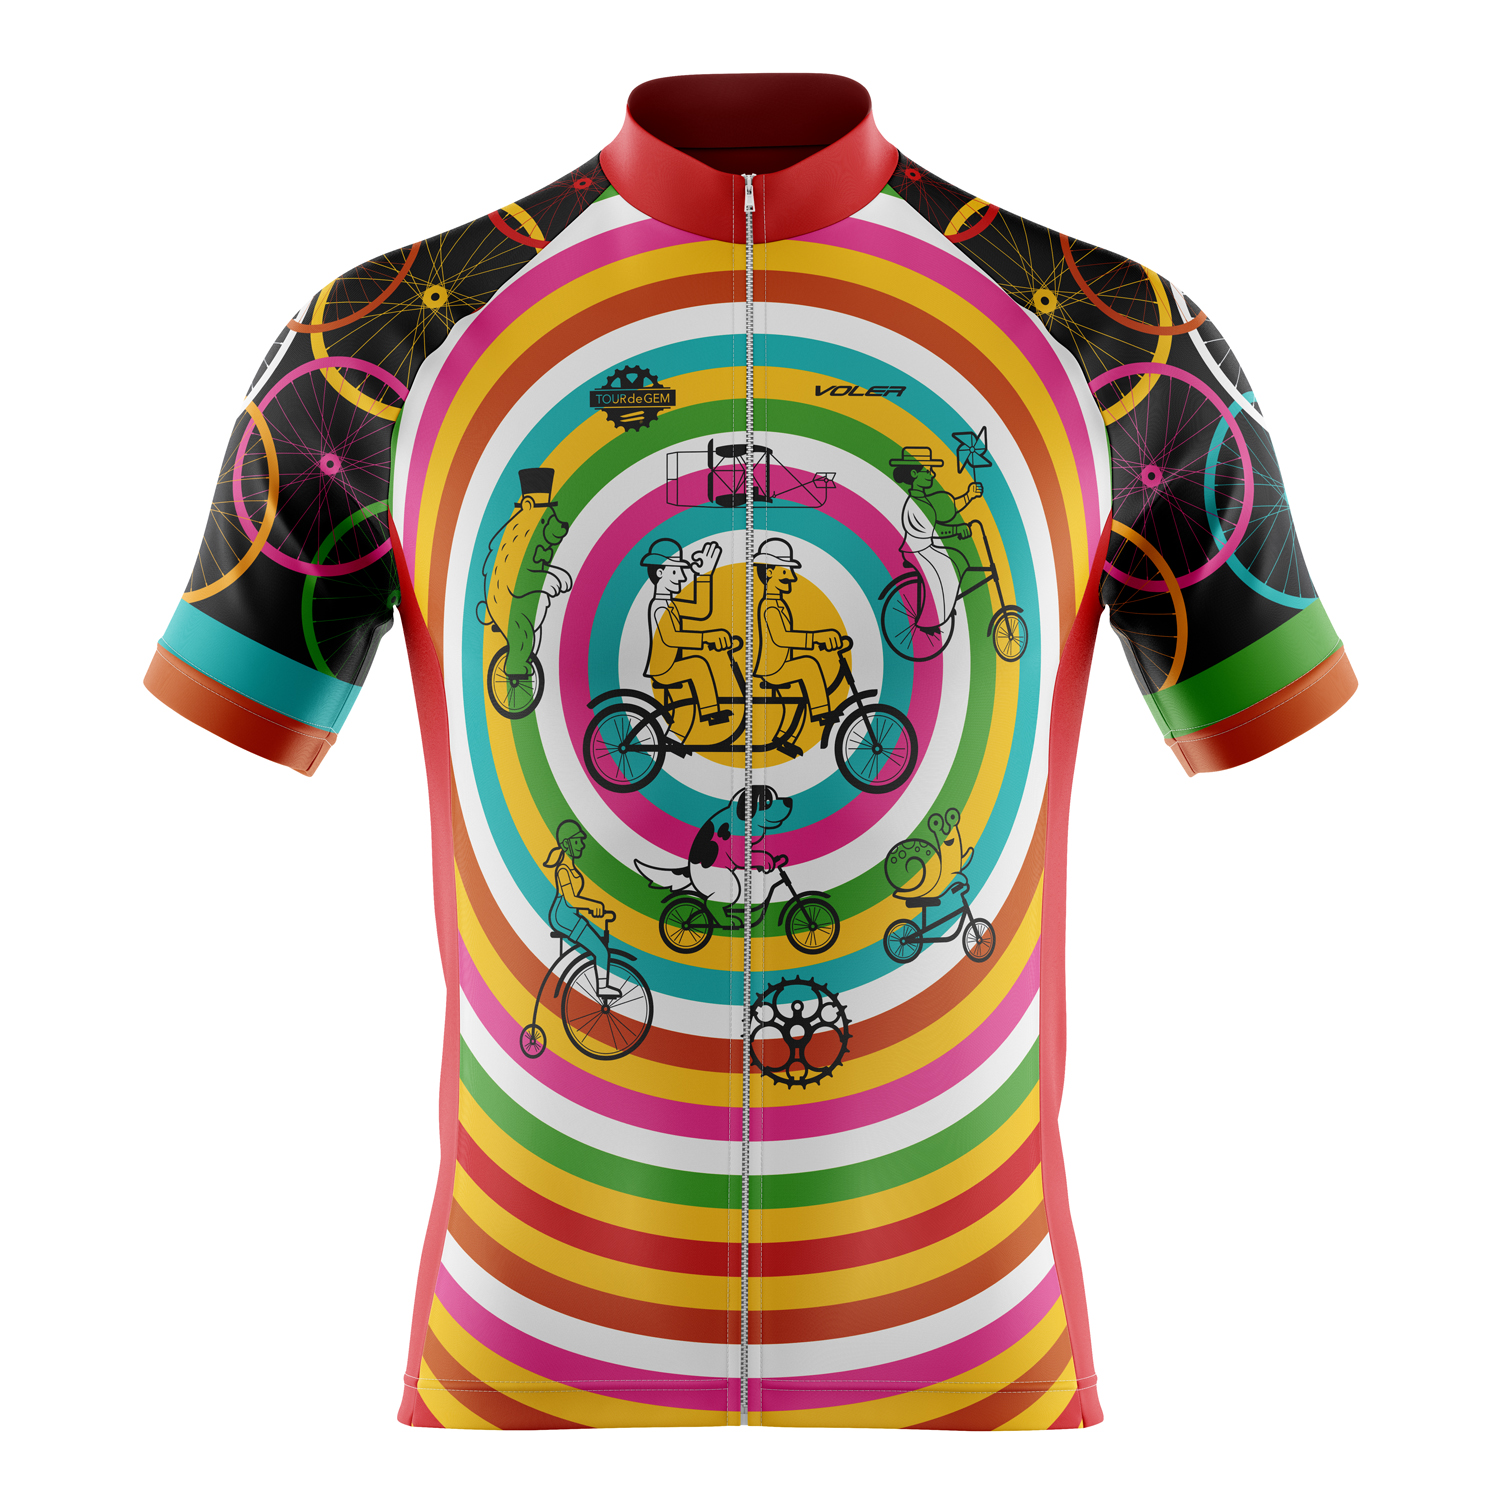 Adult 4X-Large Women's jersey